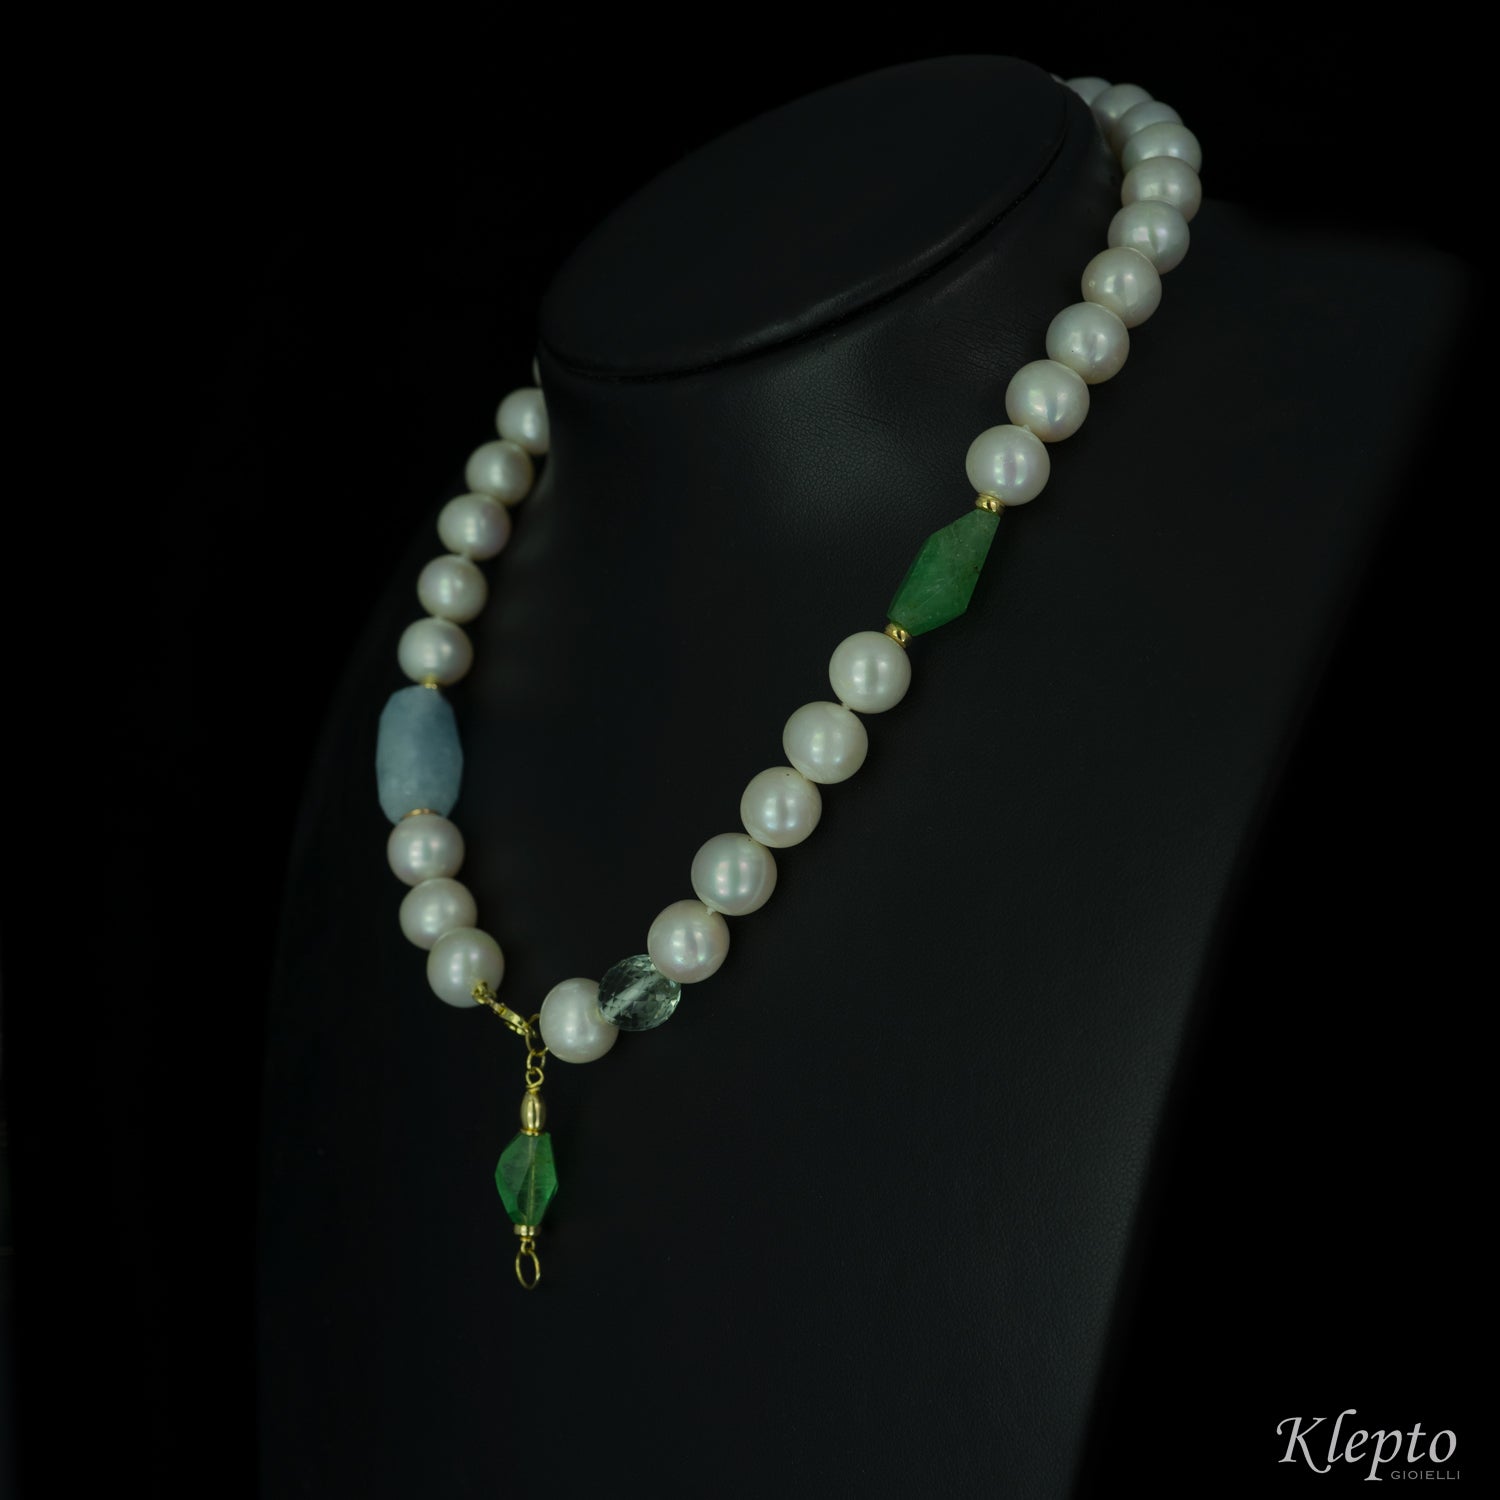 Gold necklace with Pearls, Aquamarine and Emerald